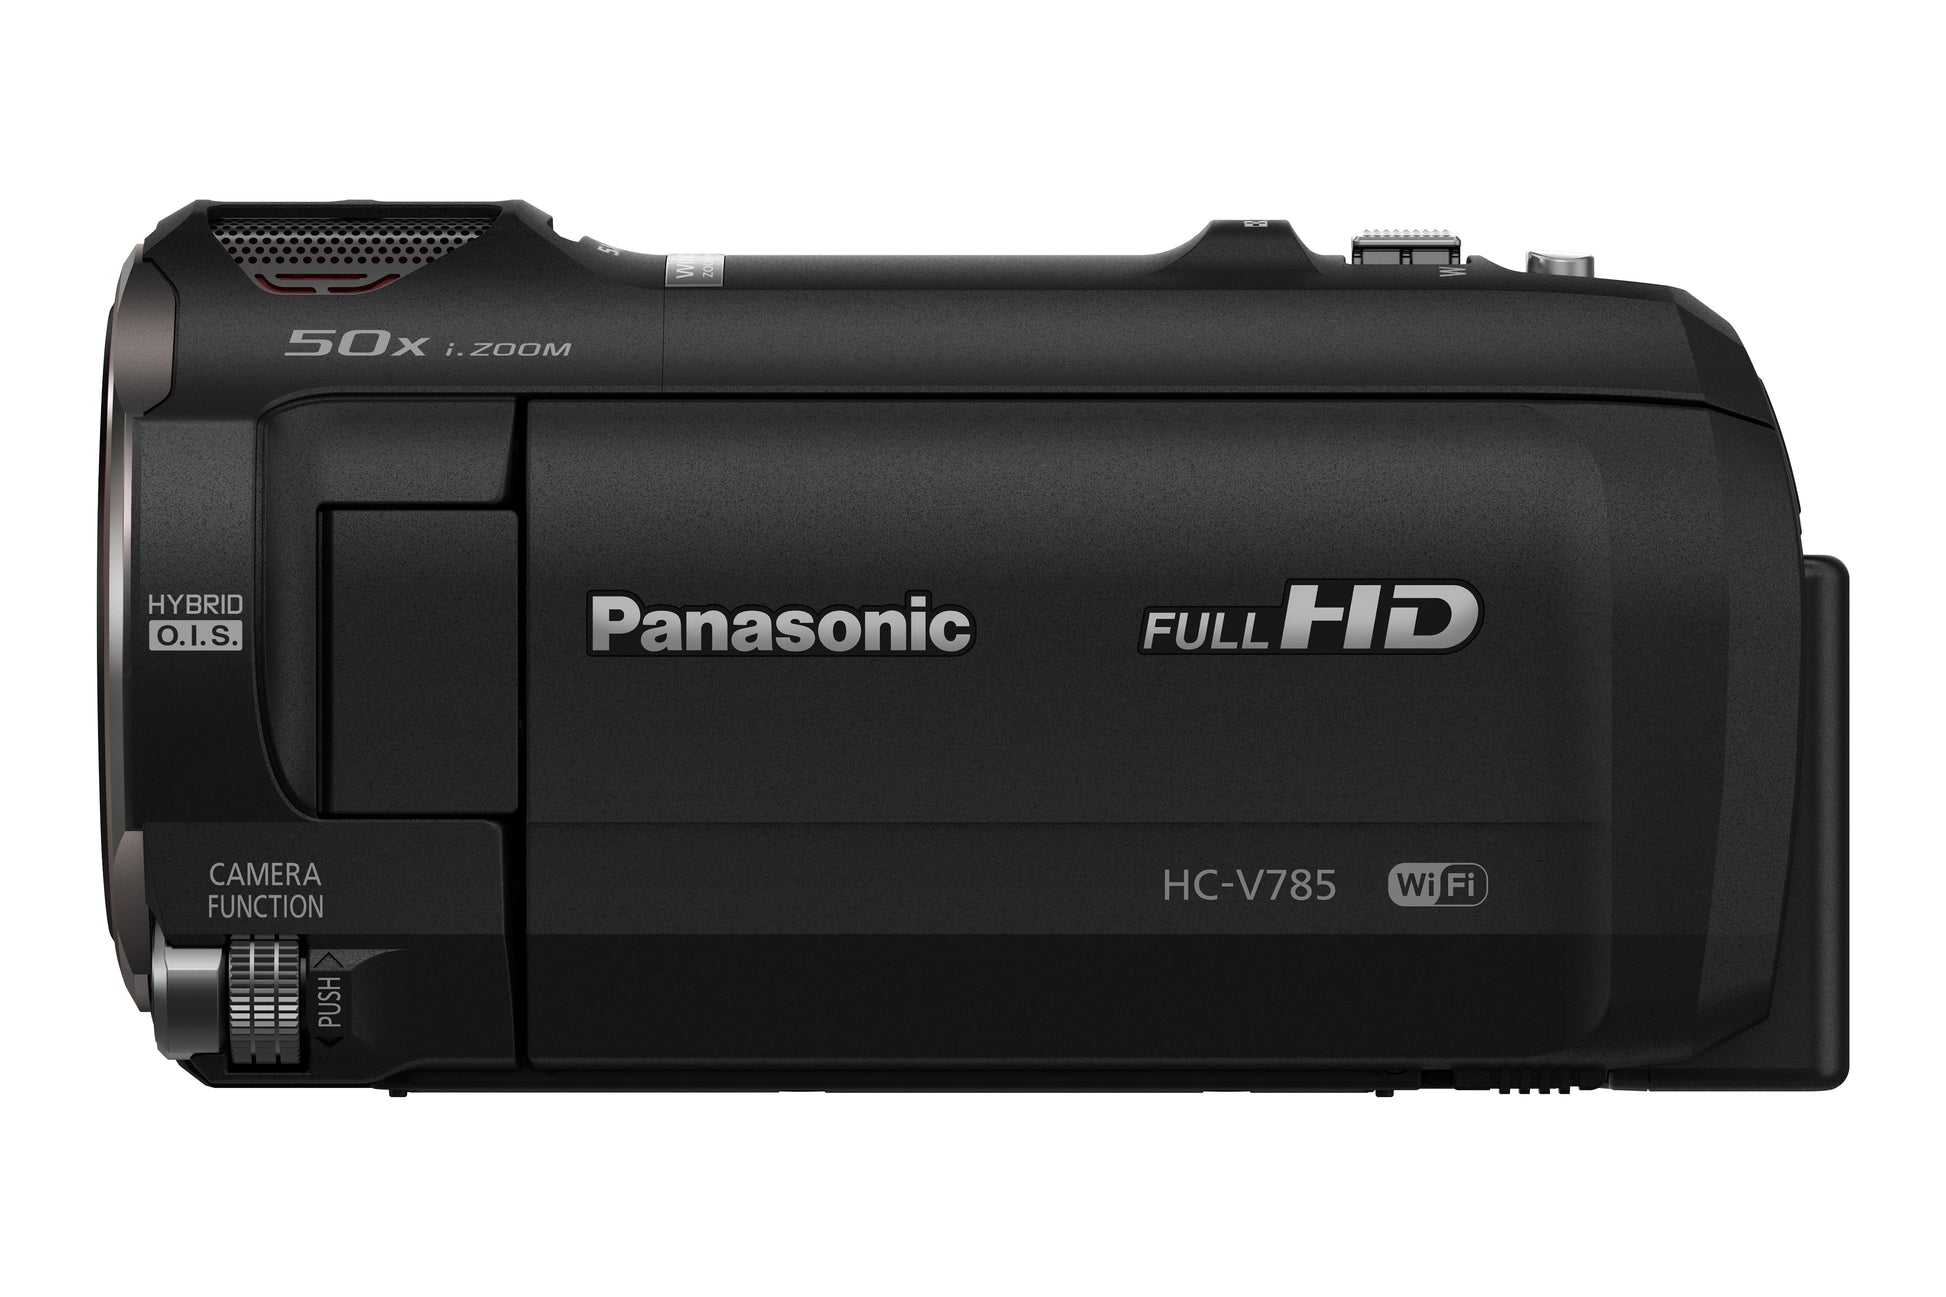 Panasonic HC-V785 Full HD Camcorder with 20x Optical Zoom, 3" LCD, WiFi & SD/SDHC/SDXC Compatibility - Black - maplin.co.uk